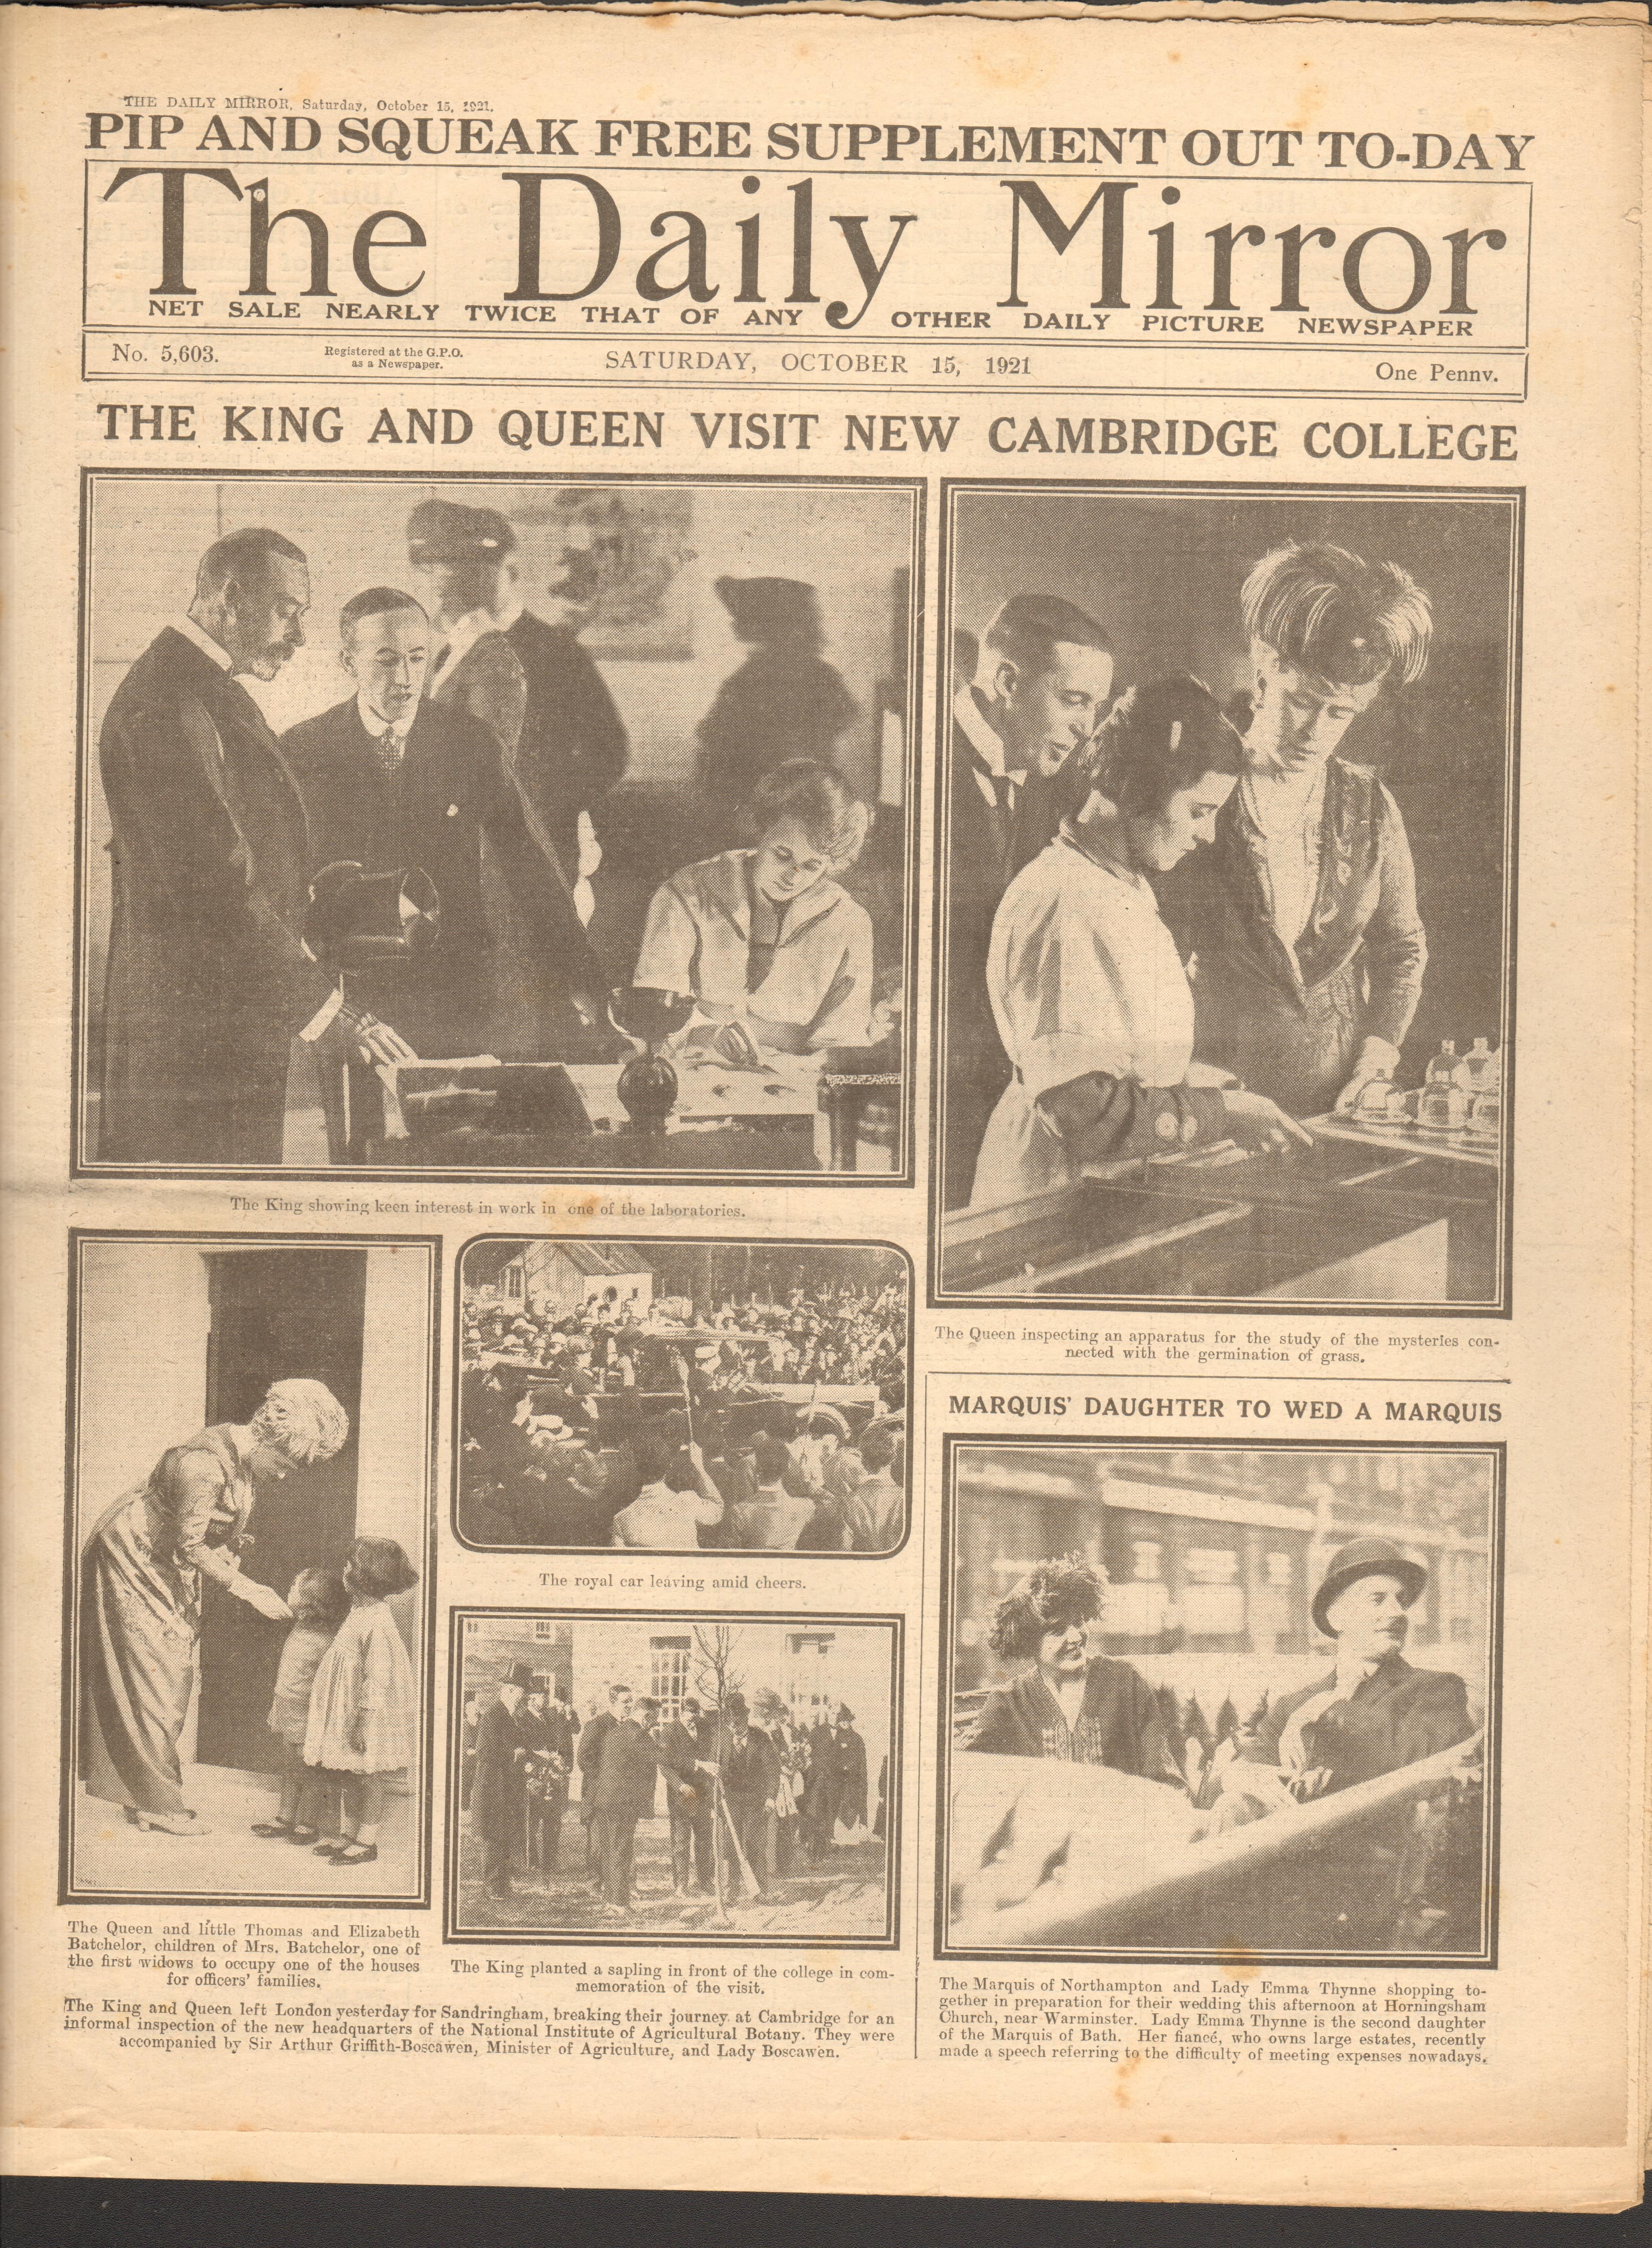 Daily Mirror Newspaper On Michael Collins At The Peace Treaty Talks 1921 - Image 2 of 2